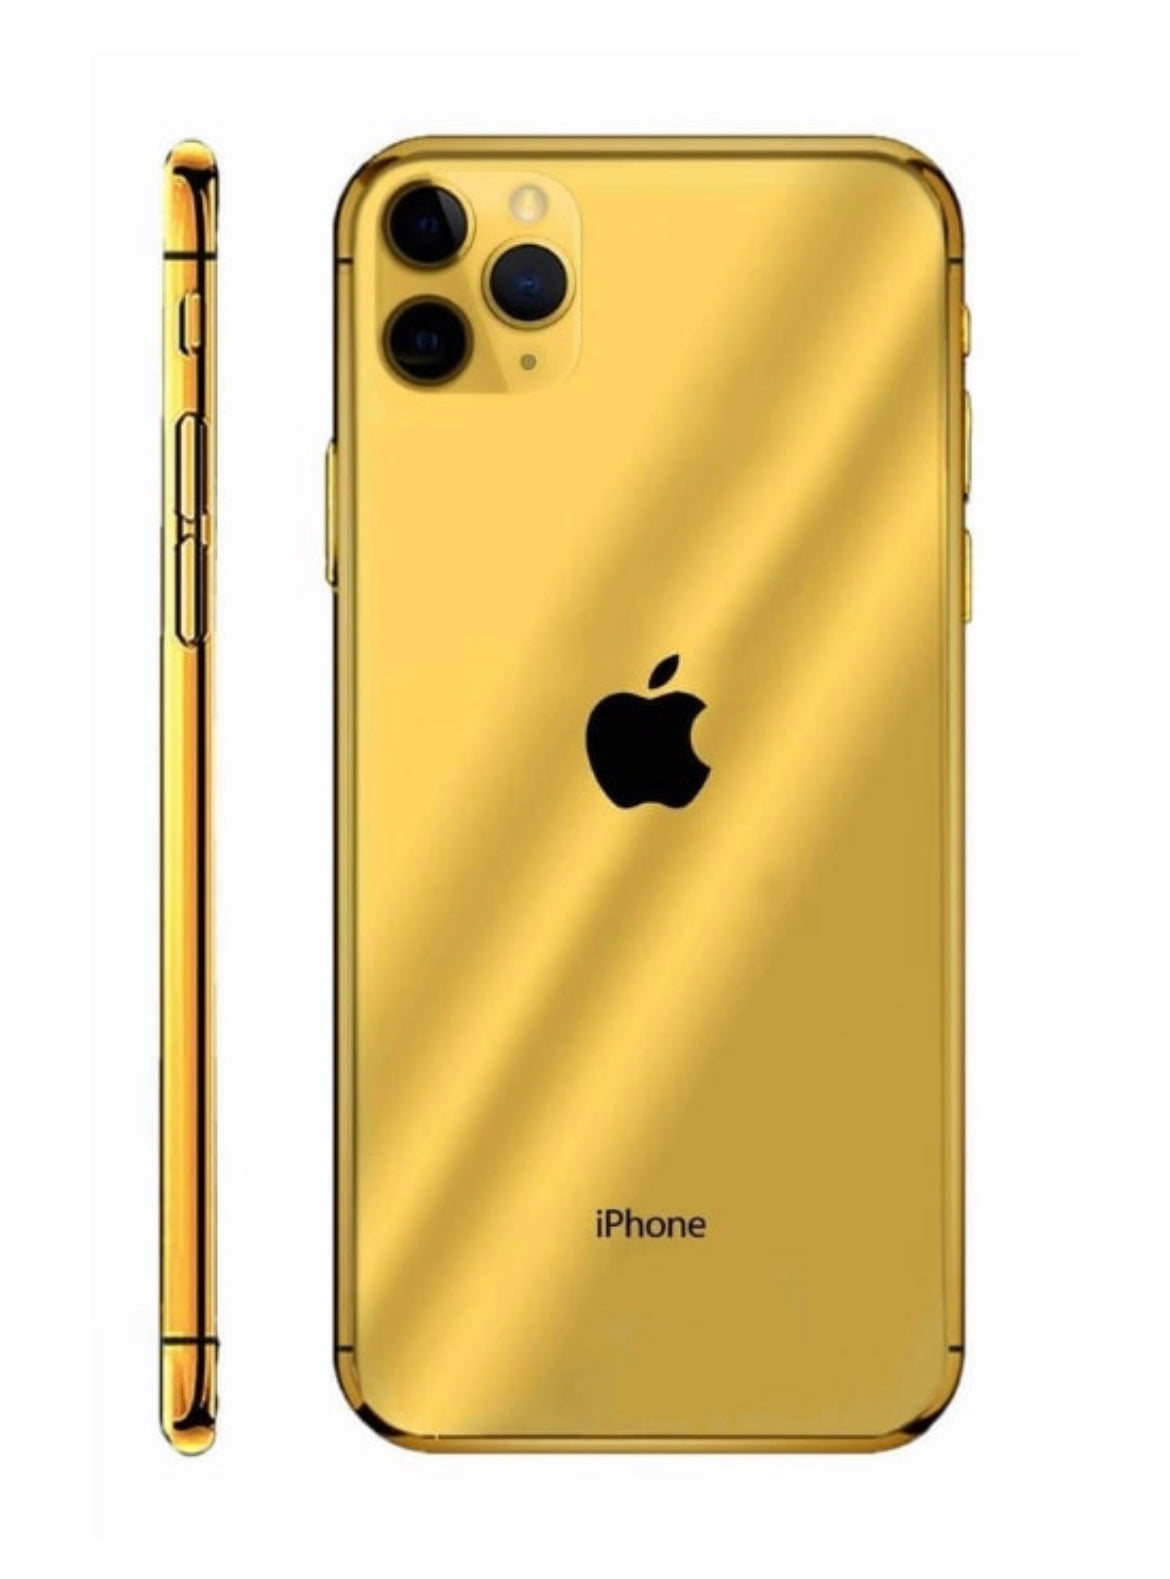 Gold plated iPhones